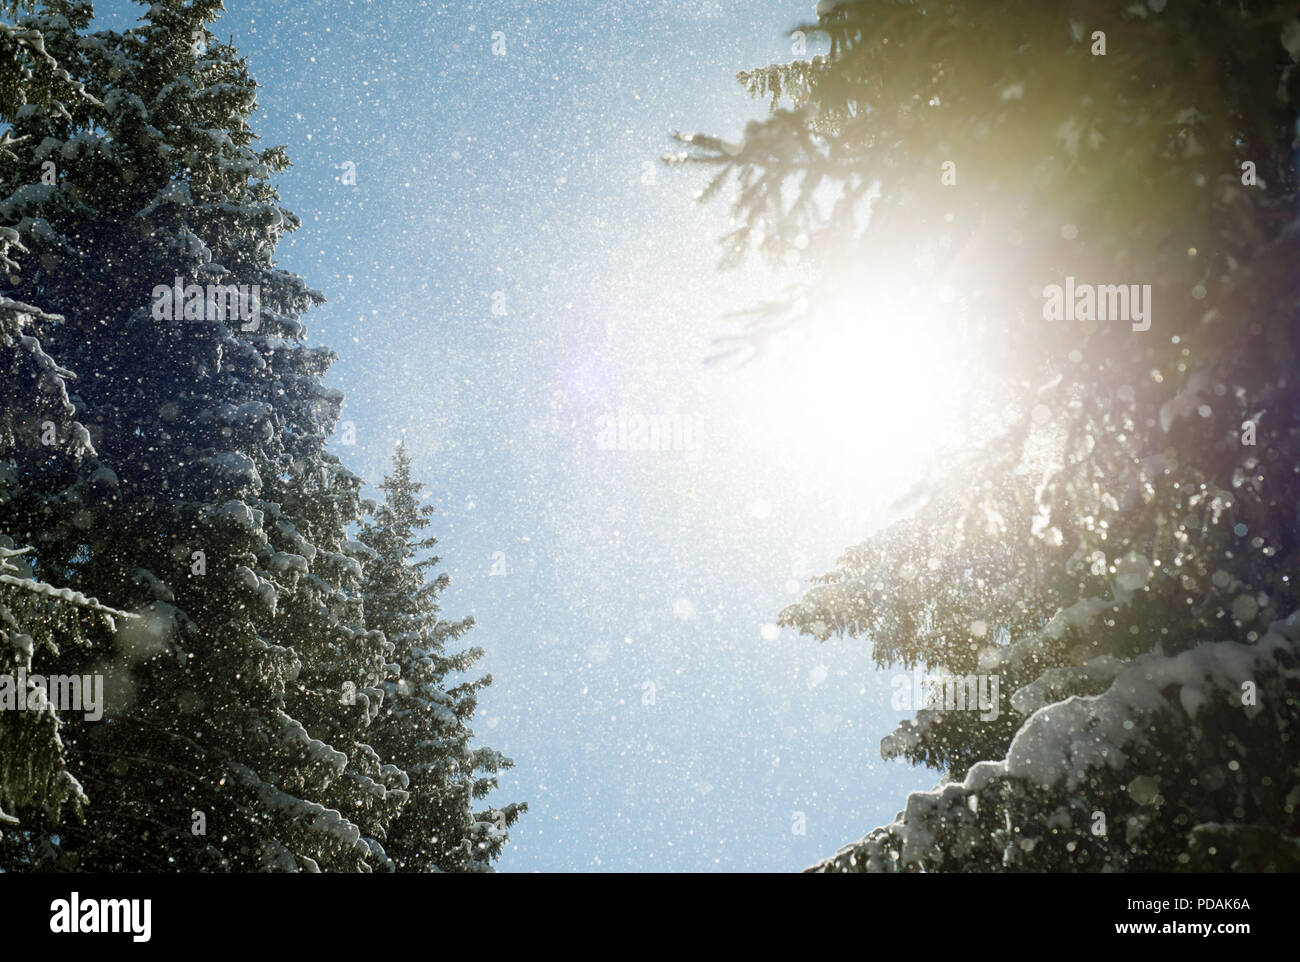 Fresh falling snow flakes fall from lush evergreen pine fir trees and are caught in the warm winter golden rays of sunlight in this wintry woodland sc Stock Photo